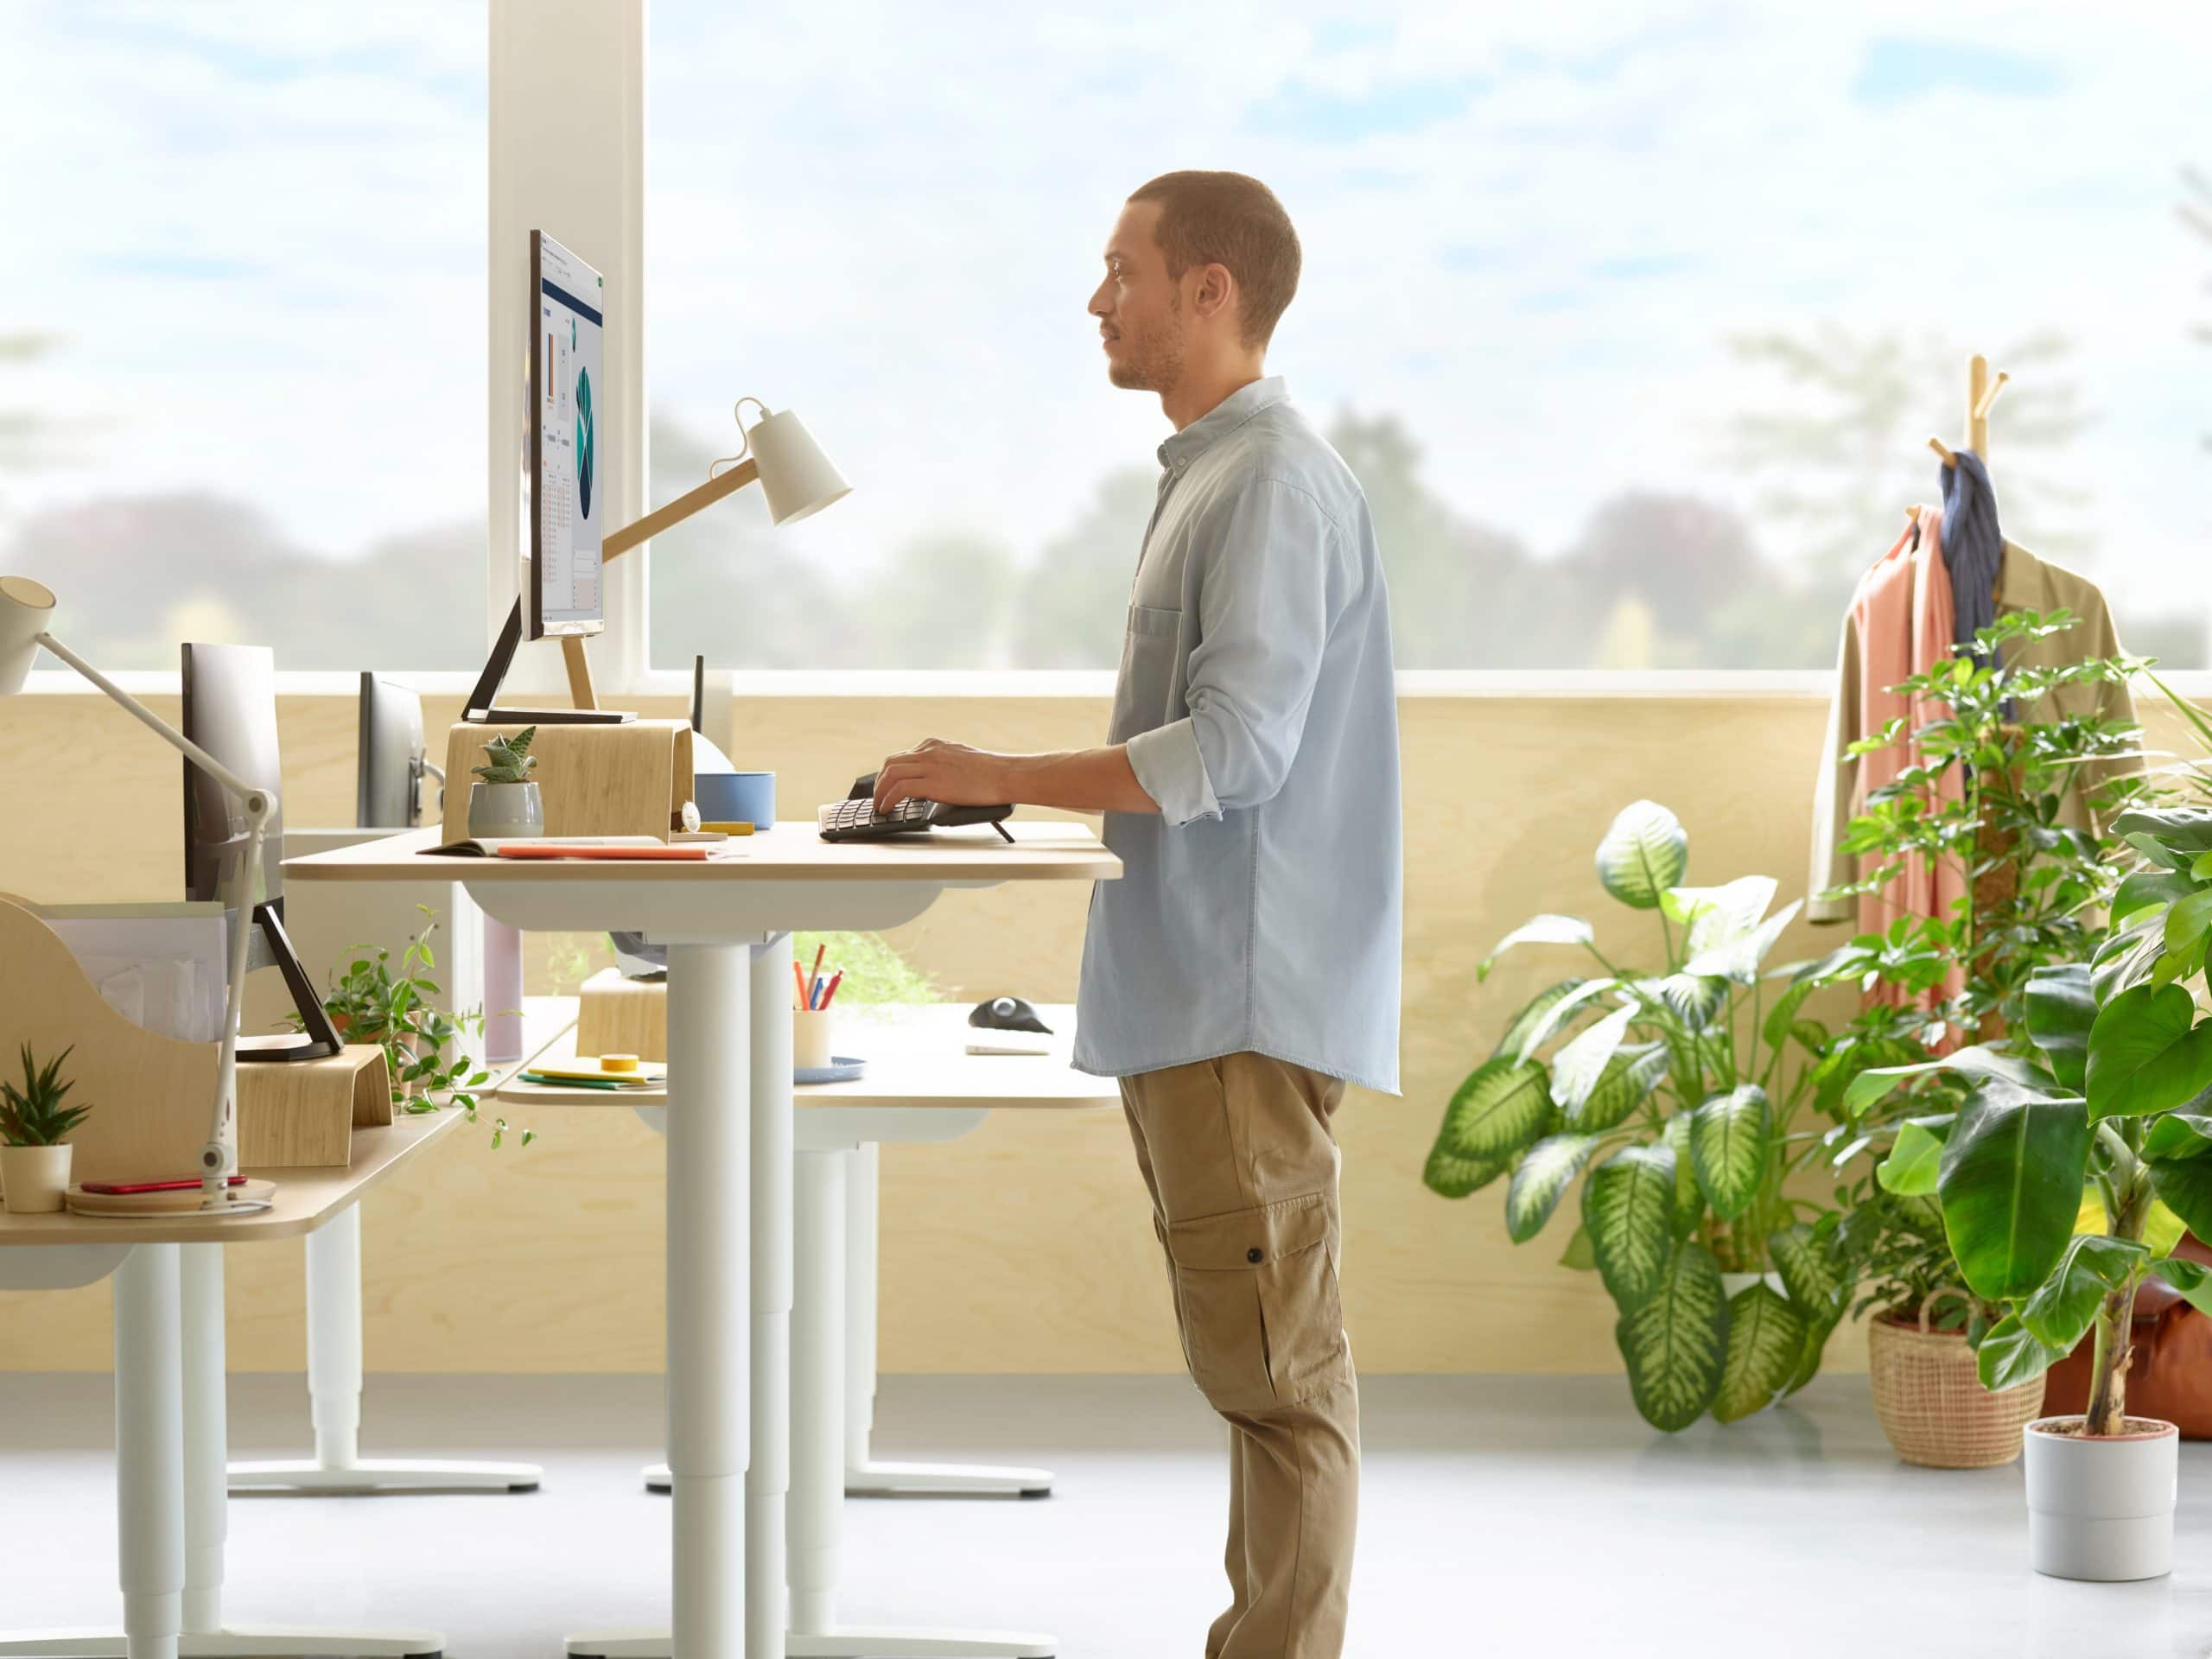 You can adjust the height of the front of the Logitech Ergo K860 keyboard to optimize your wrist position at a standing desk.